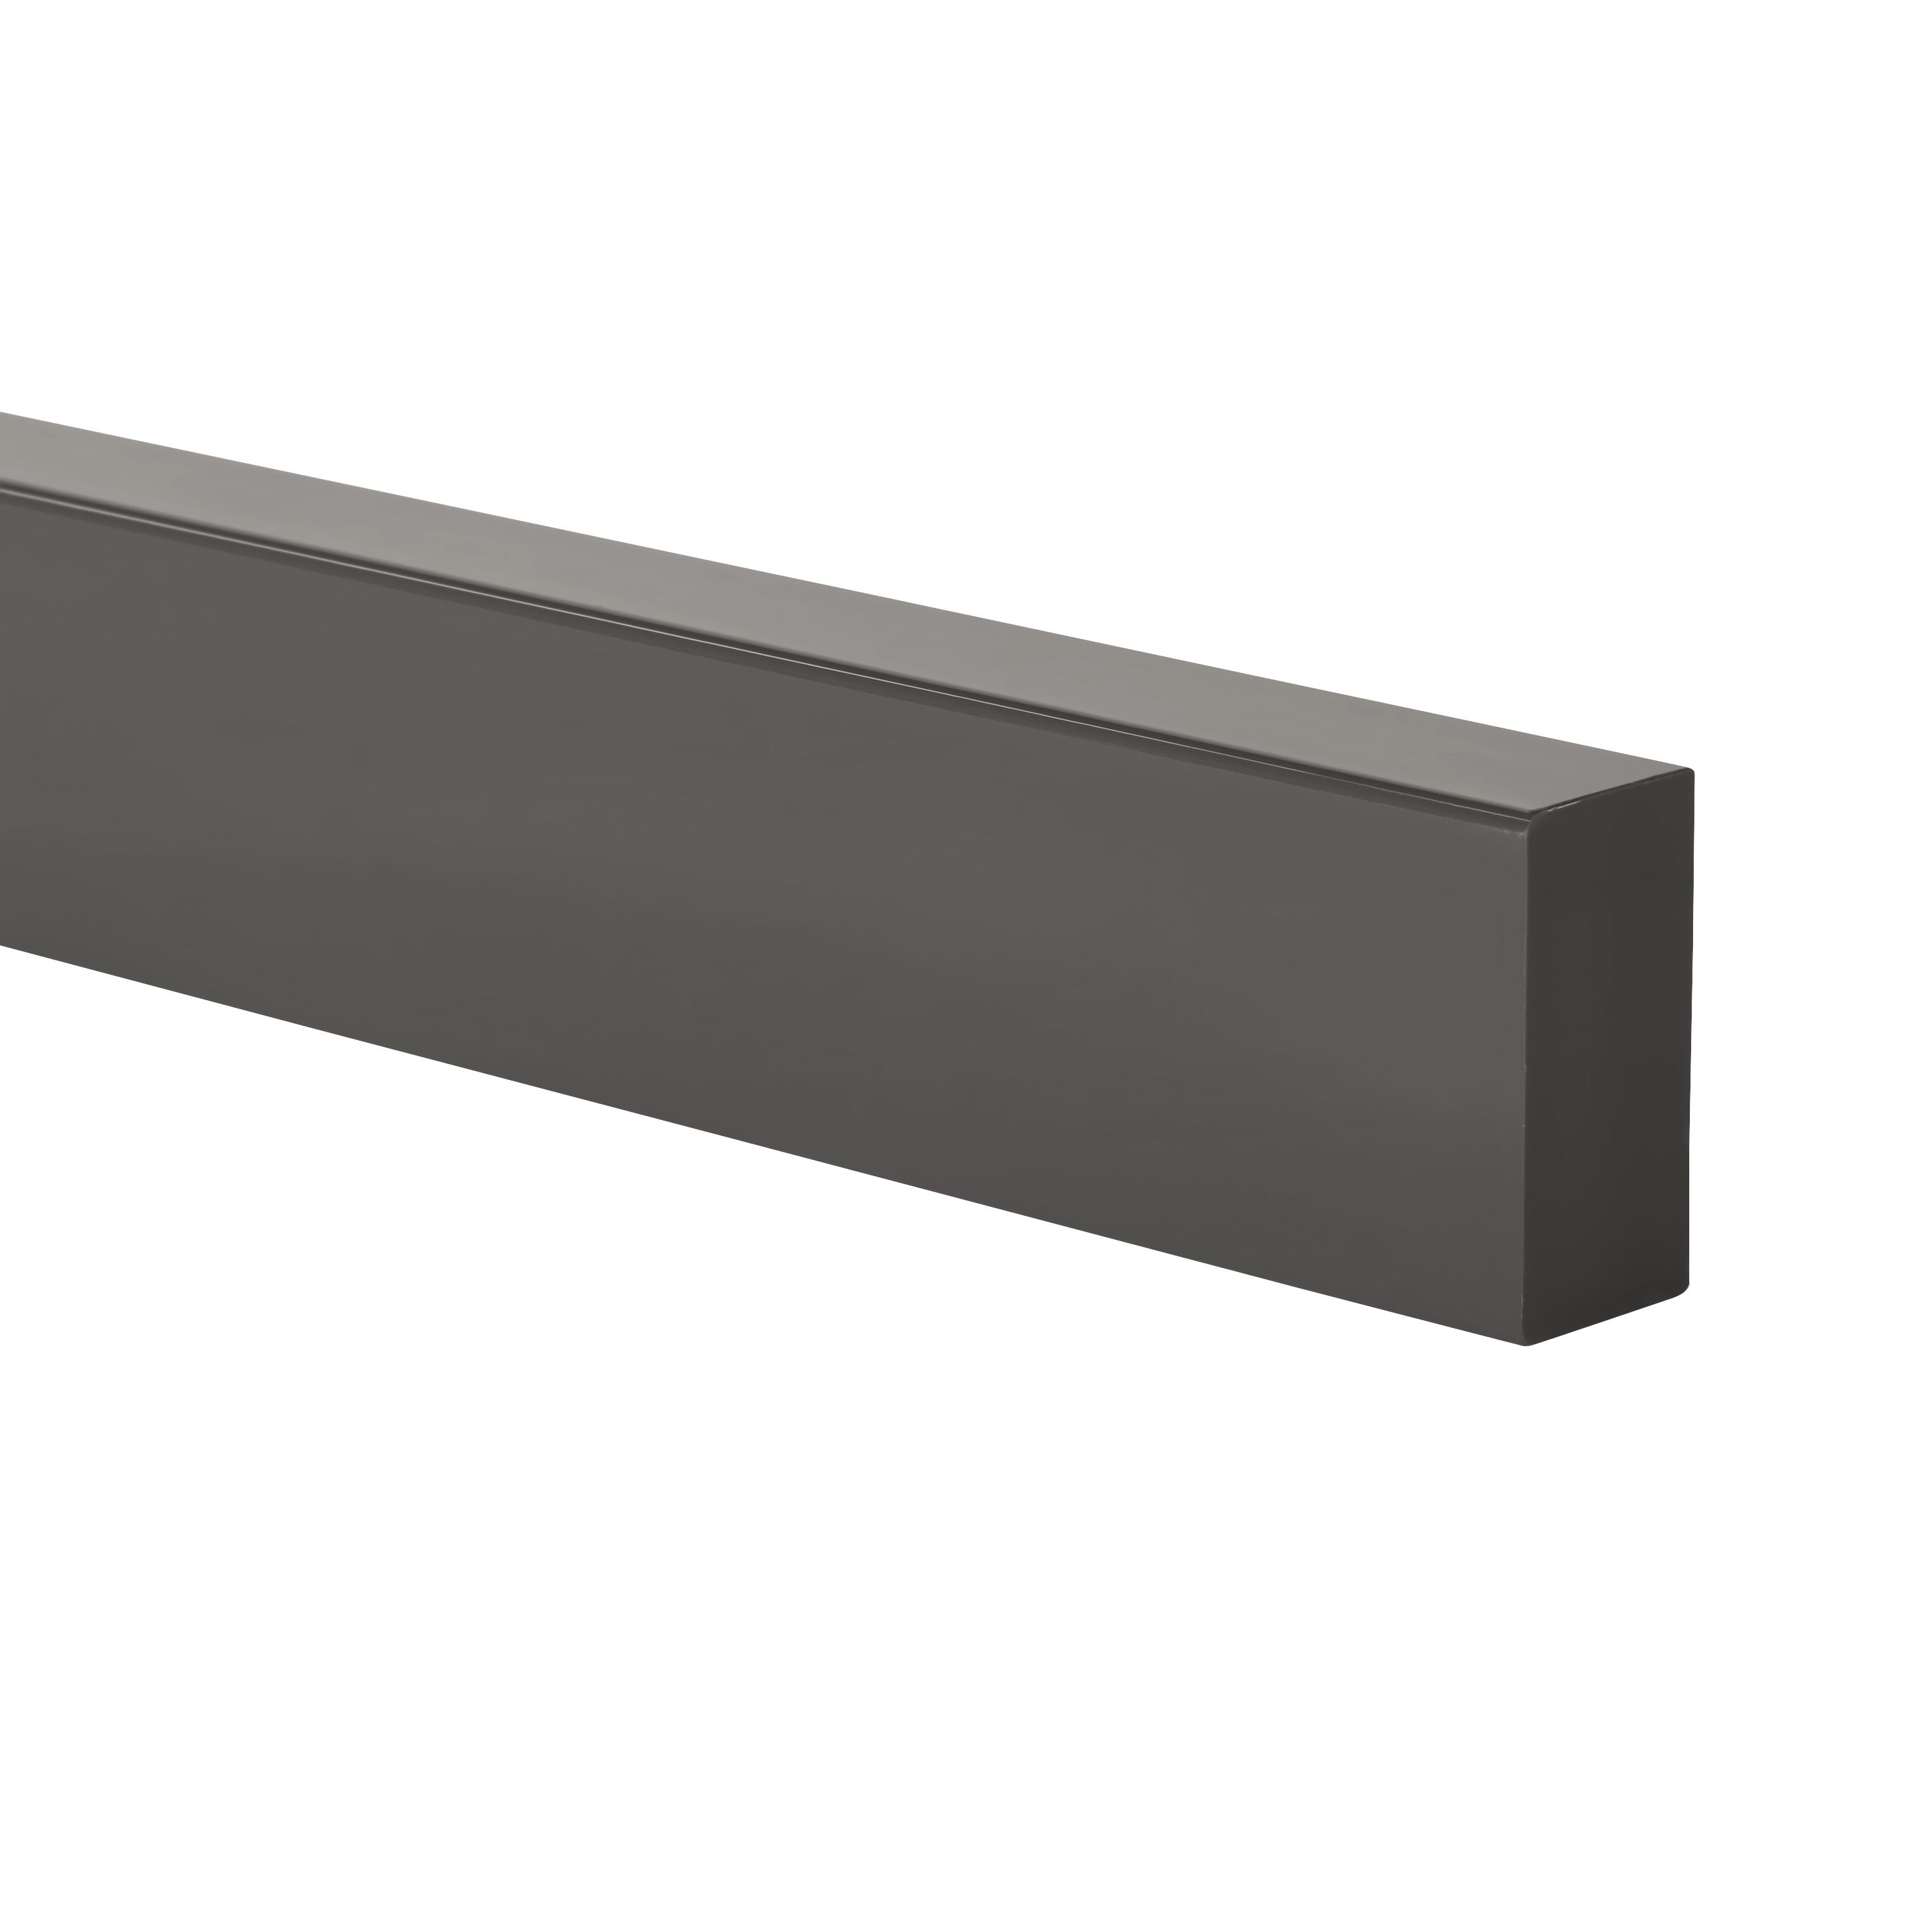 GoodHome Garcinia Gloss anthracite Standard Appliance Filler panel (H)58mm (W)597mm